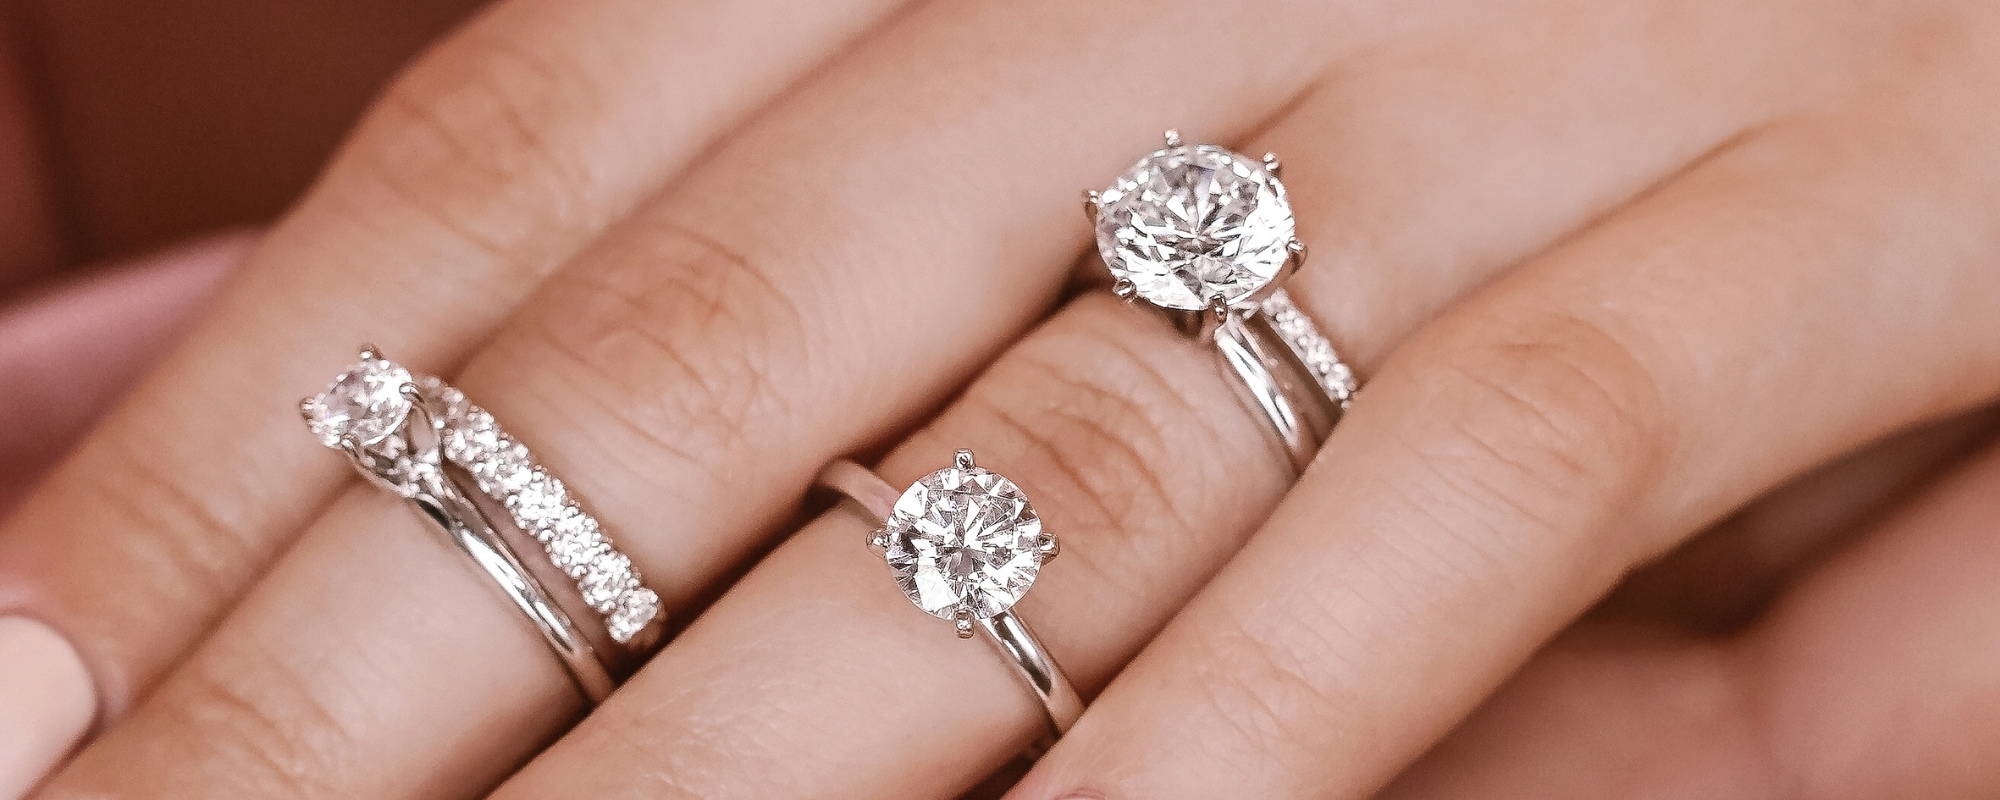 Are Tiffany Engagement Rings Worth It? : r/EngagementRings